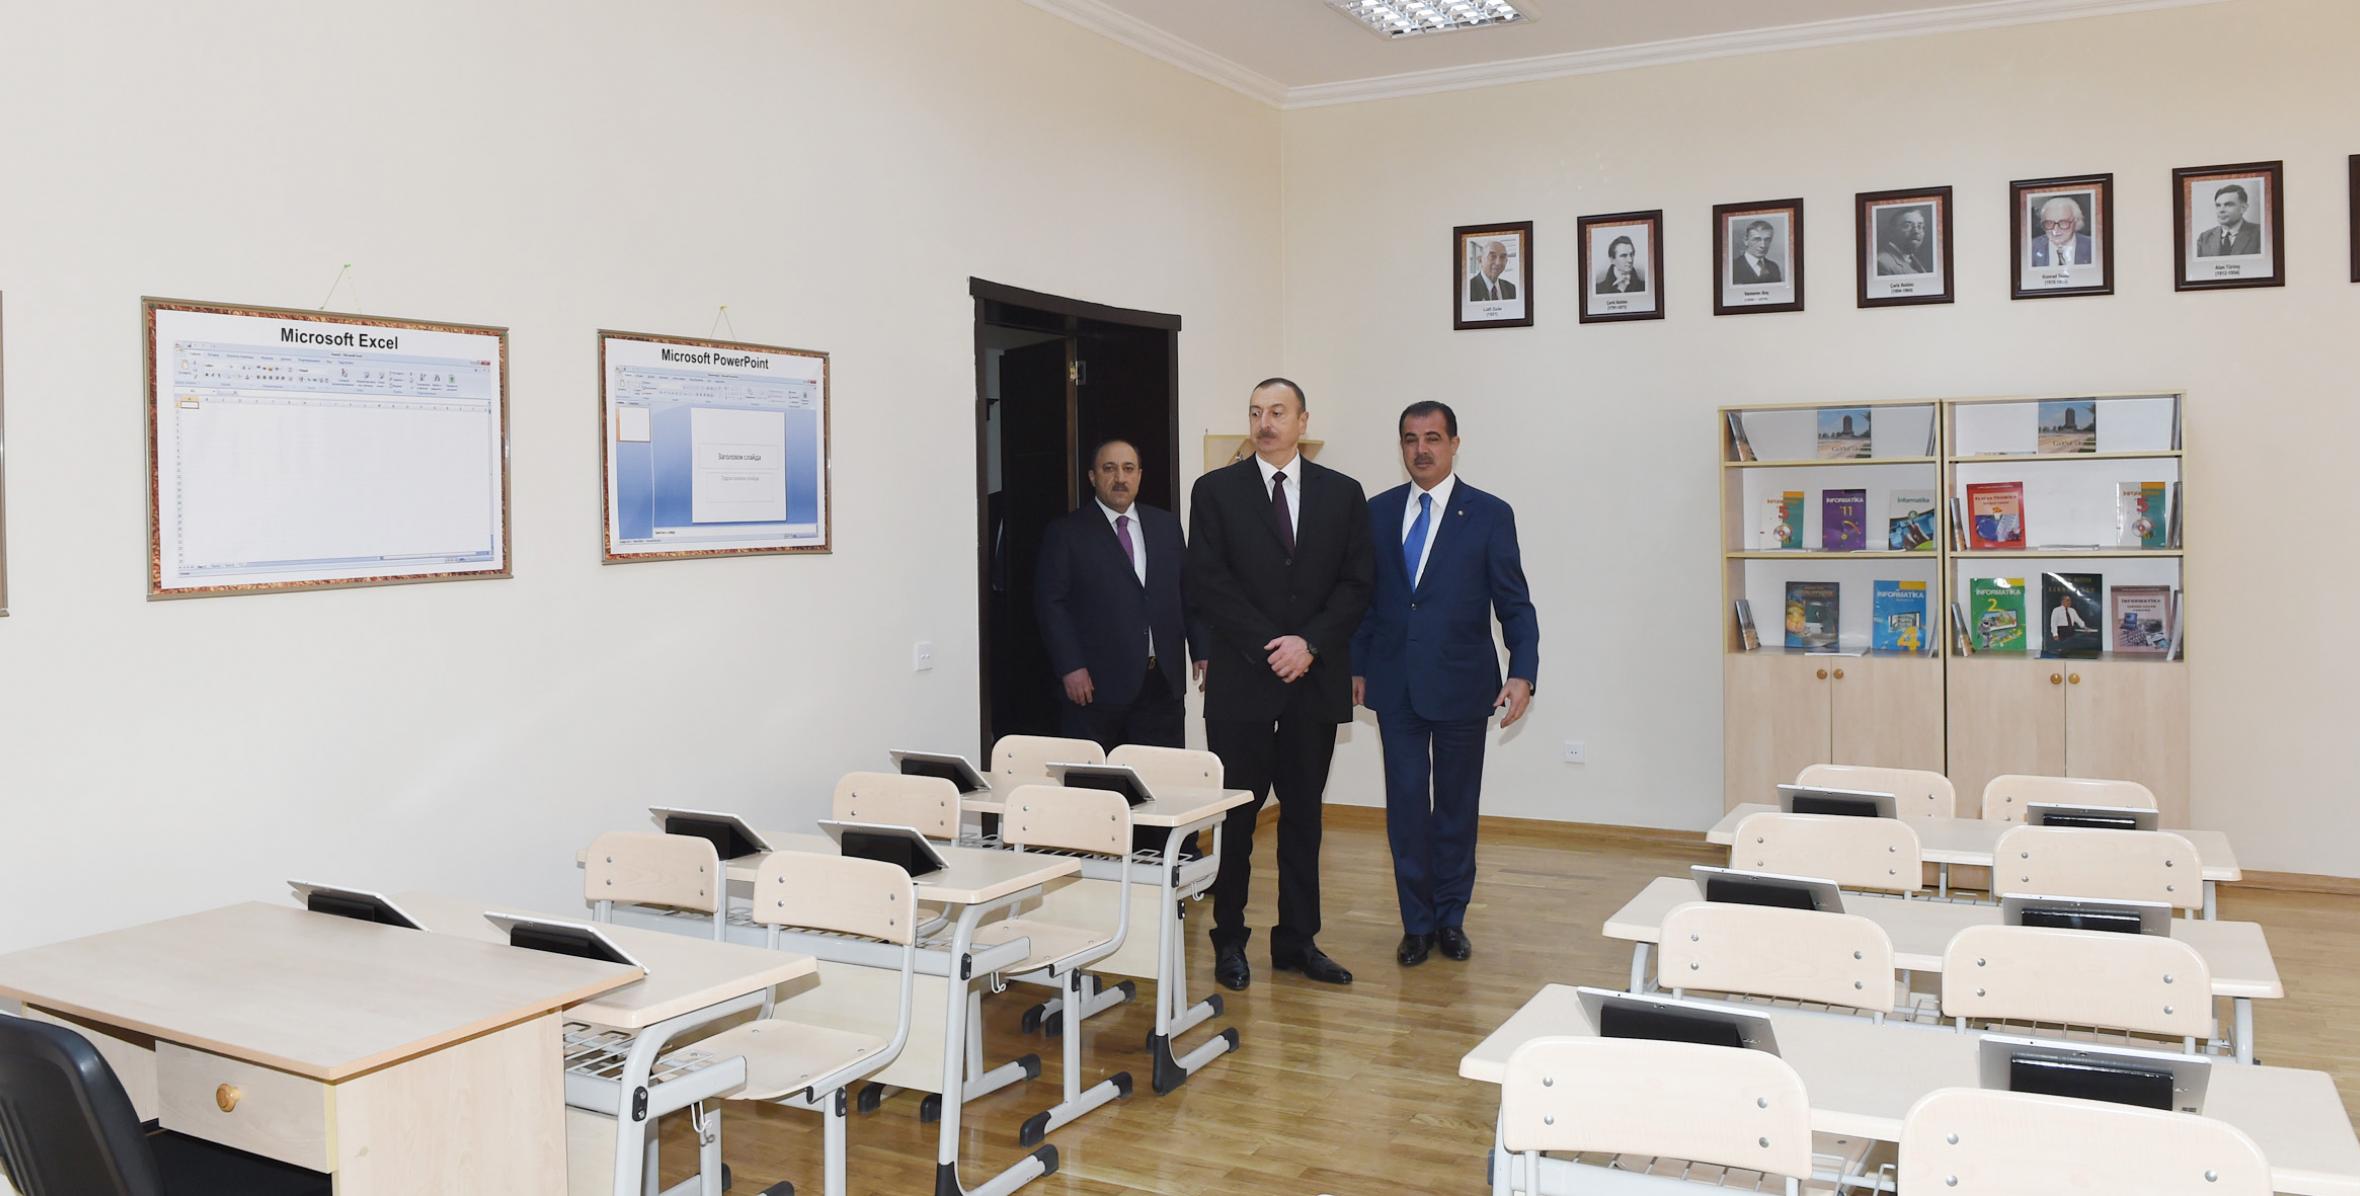 Ilham Aliyev attended the opening of secondary school No. 39 in Ganja